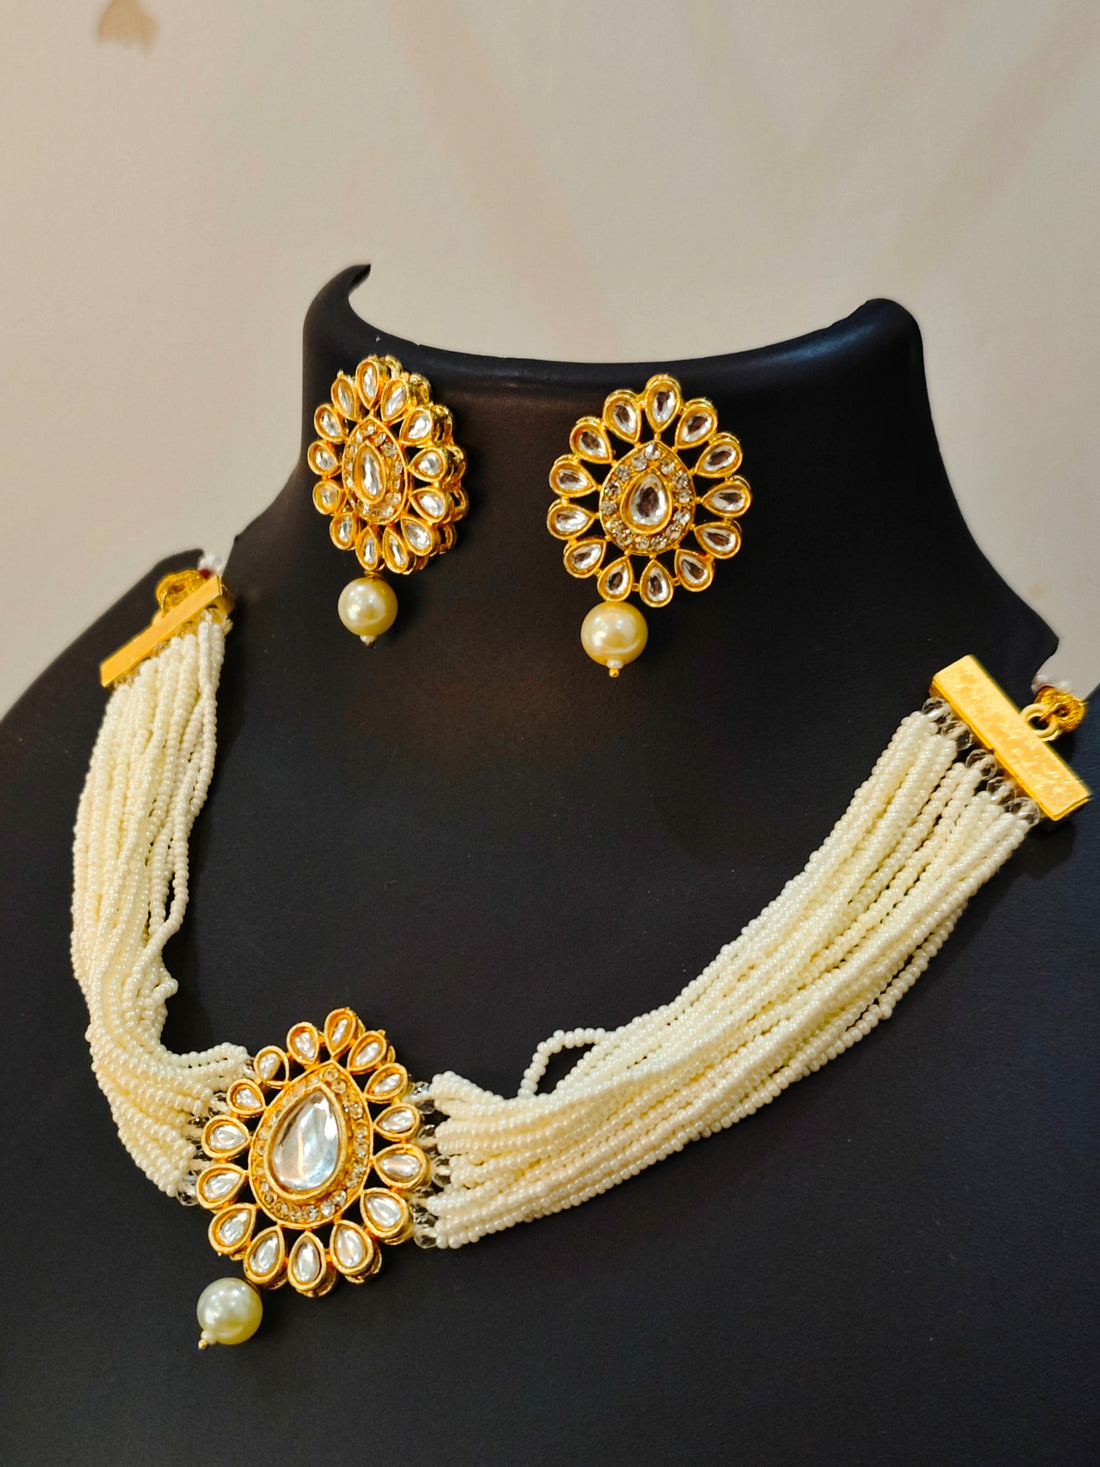 Moti Haari Chokar Necklace Set from house of Mrigaya by Nandini for Traditional and Festive Indian Look | for Gifting- Gold & Clear - Mrigaya India